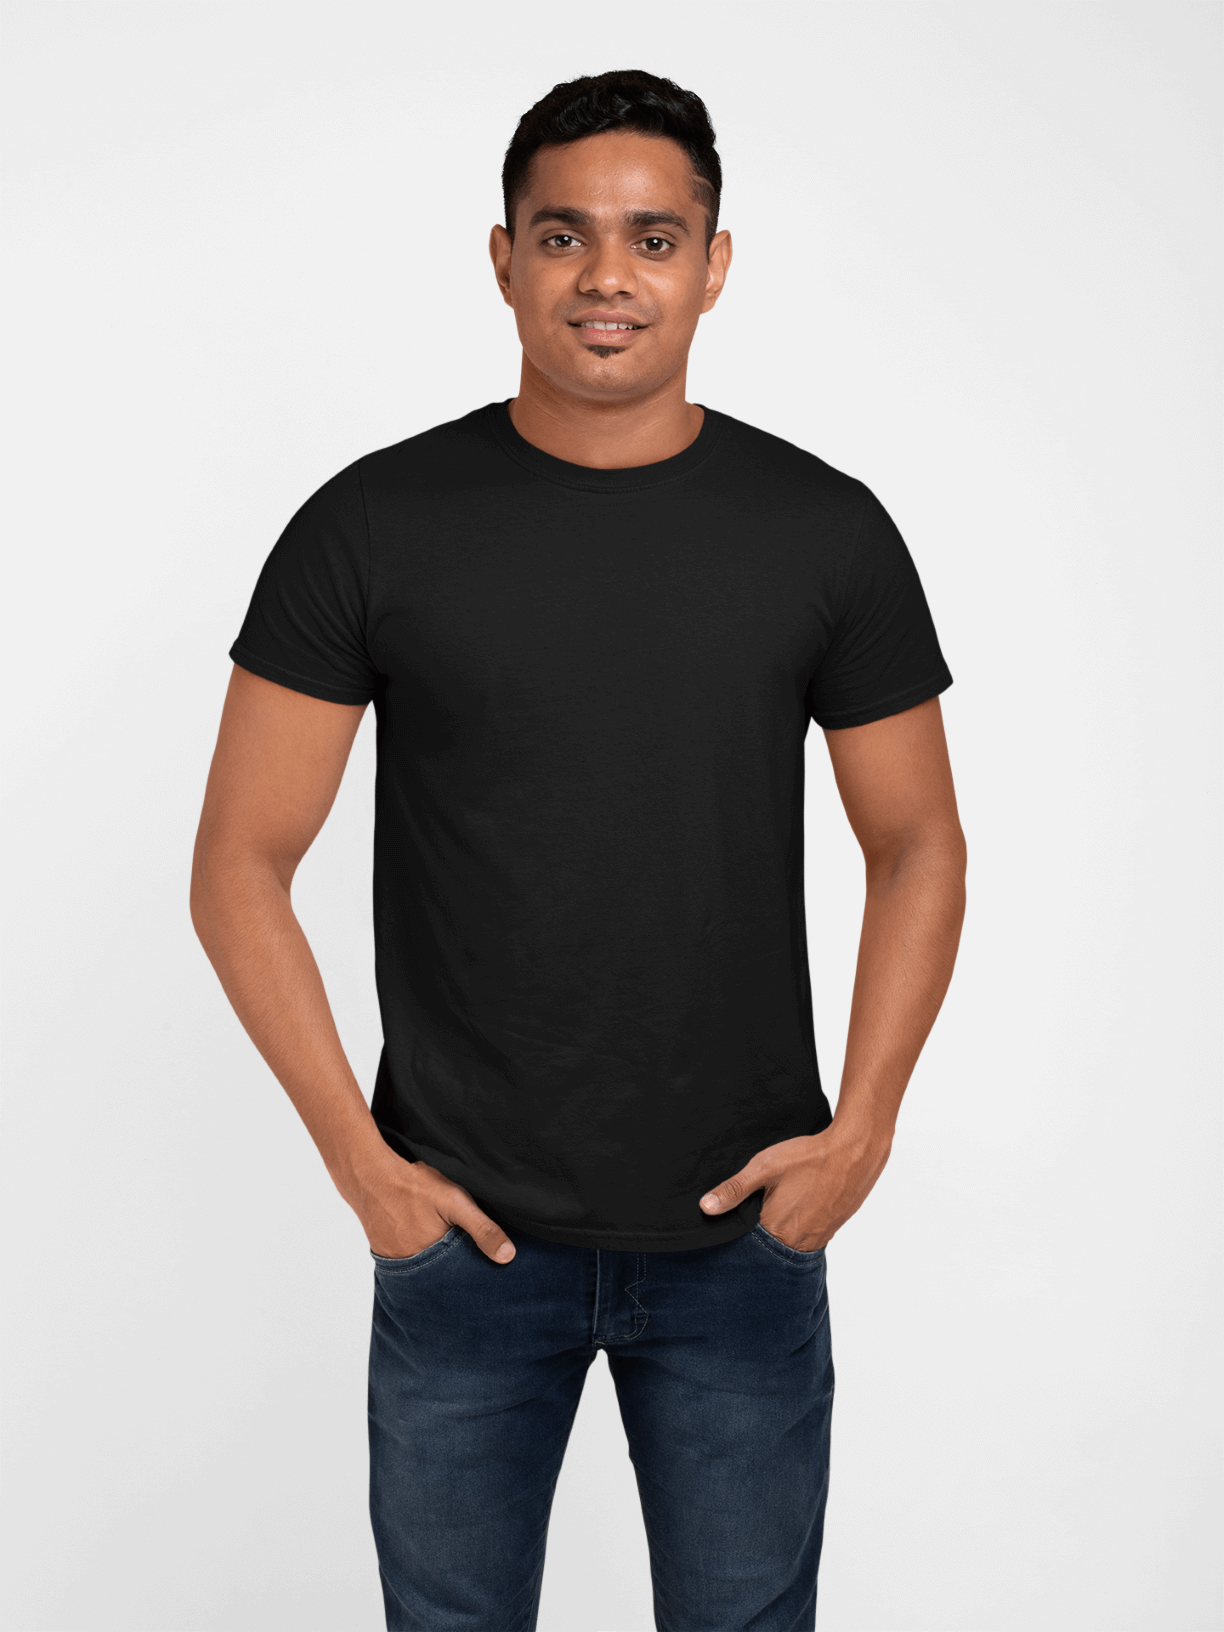 How to find a black T-shirt for Men | TechPlanet